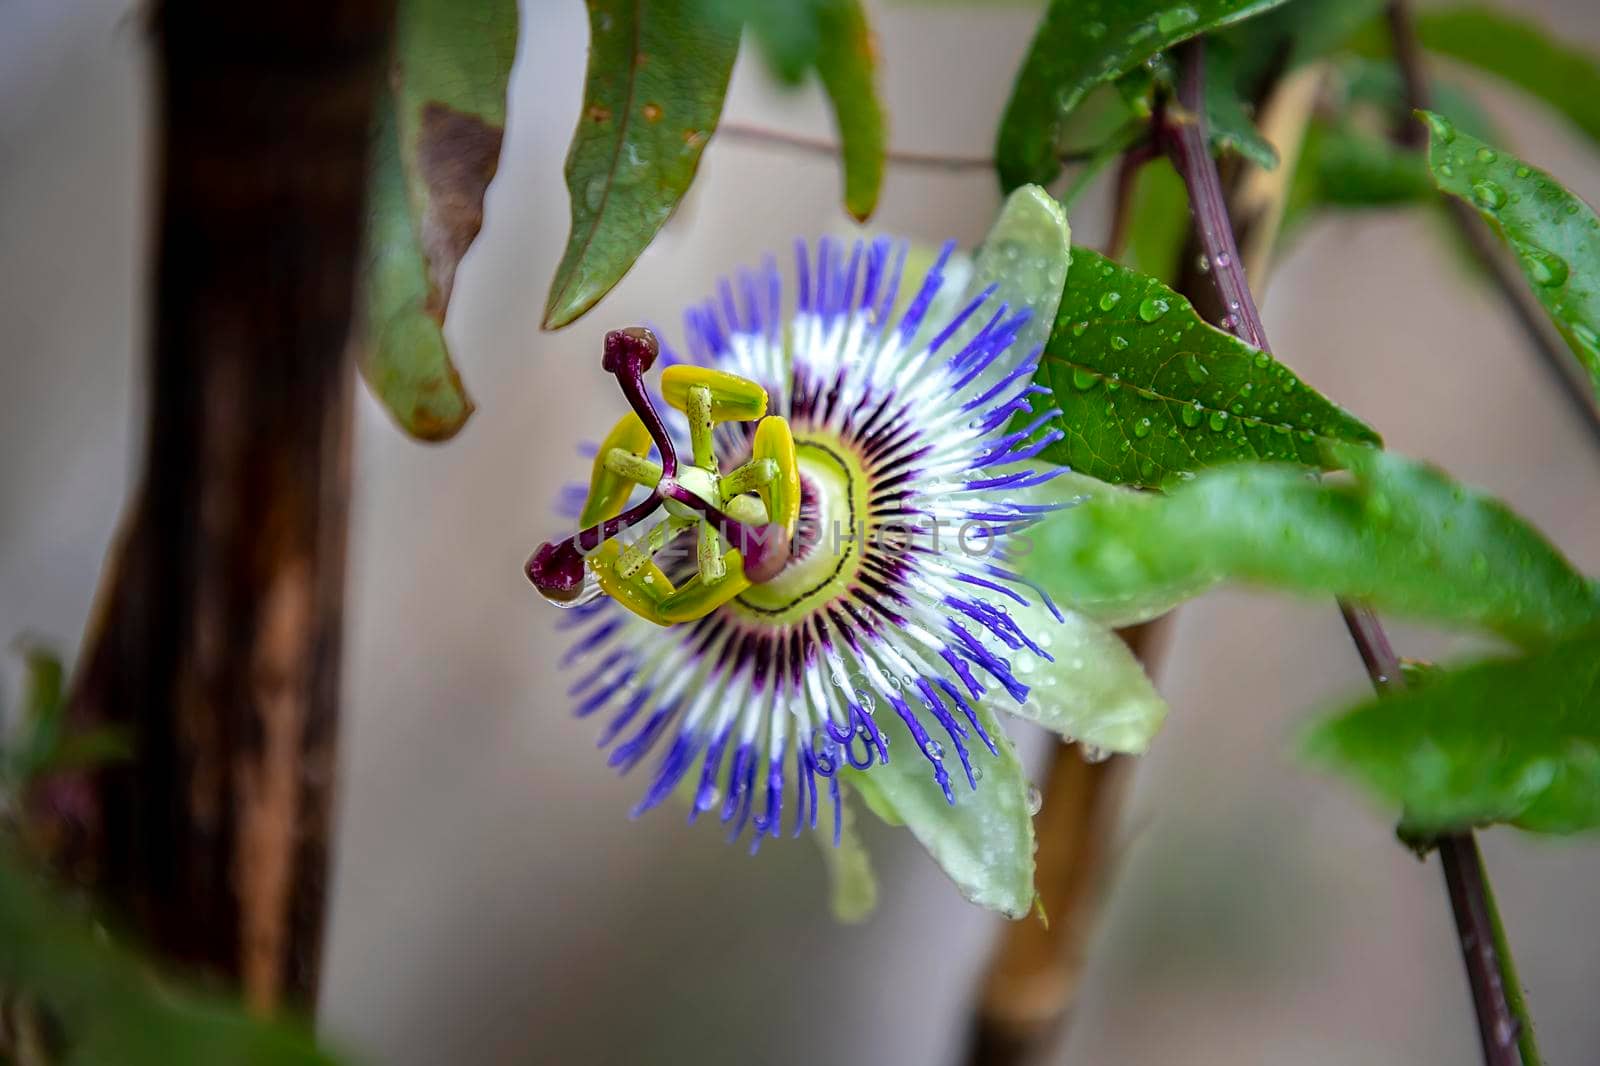 A close up of the passion flower after rain, a special flower that blooms for a few days. Passiflora